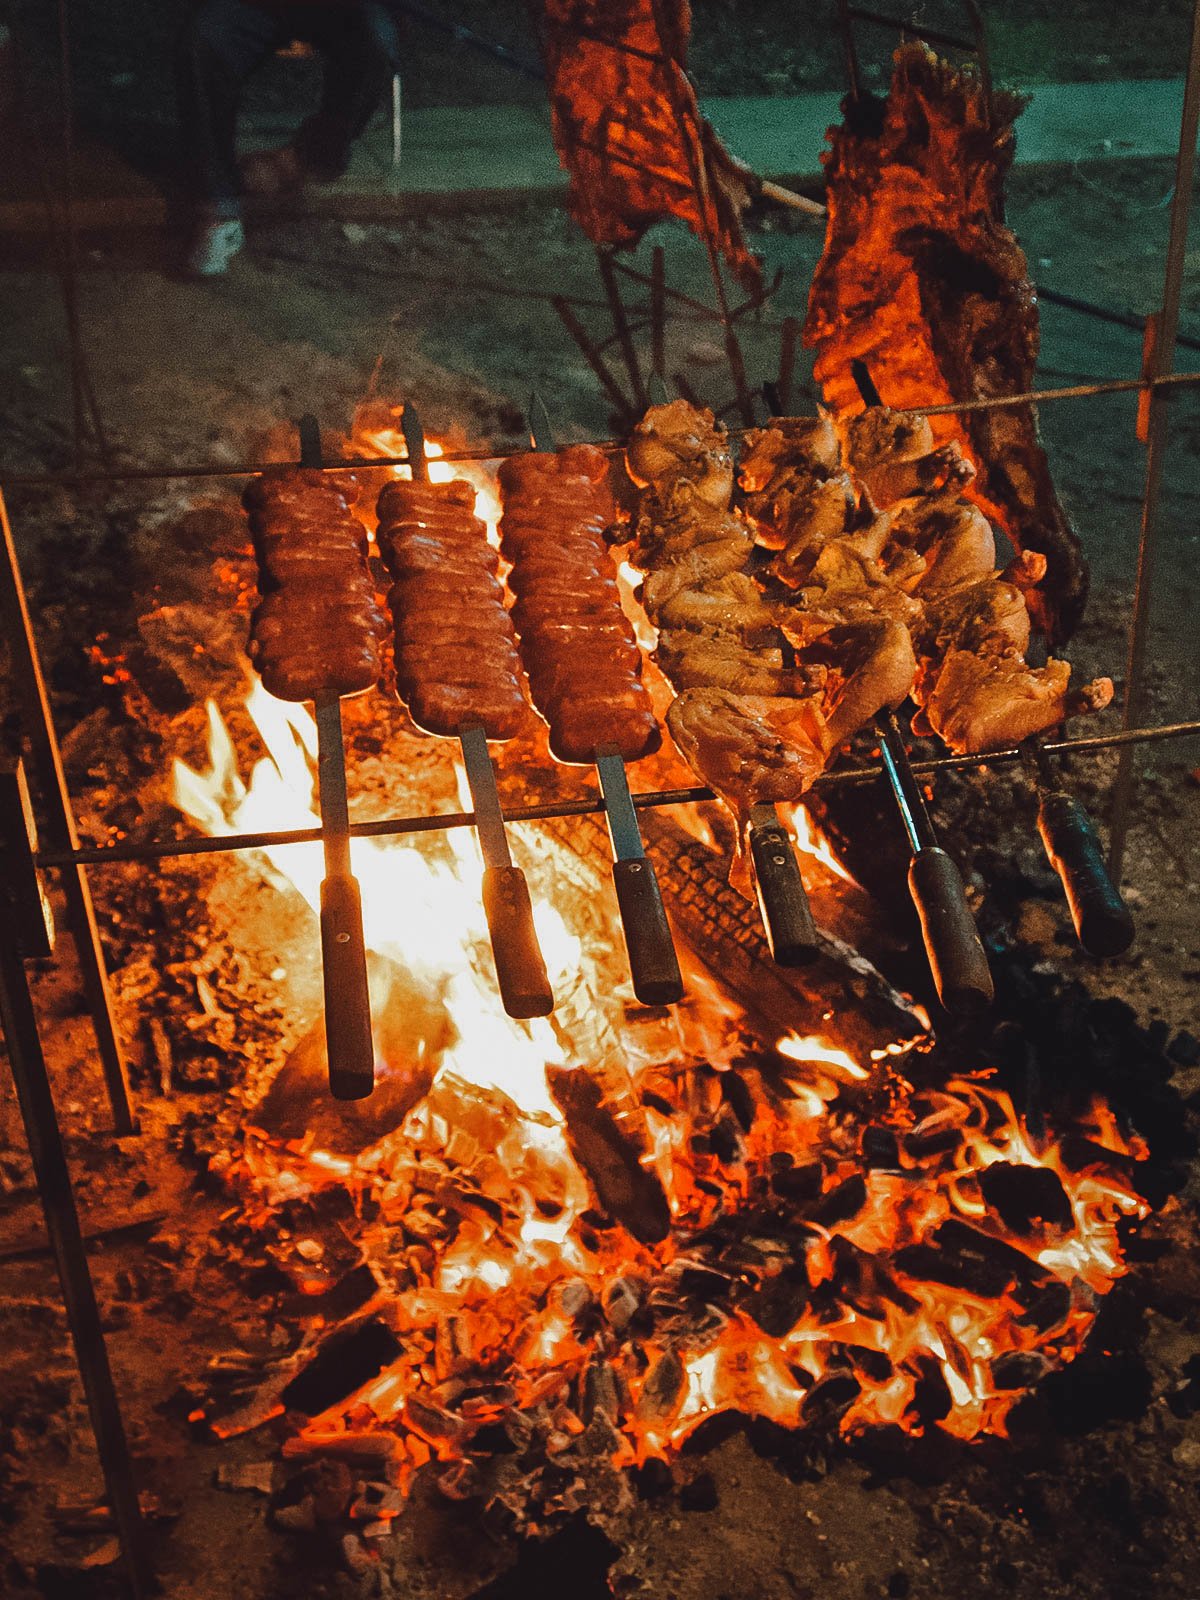 Churrasco meats grilling over a fire, one of the most delicious Brazilian traditions